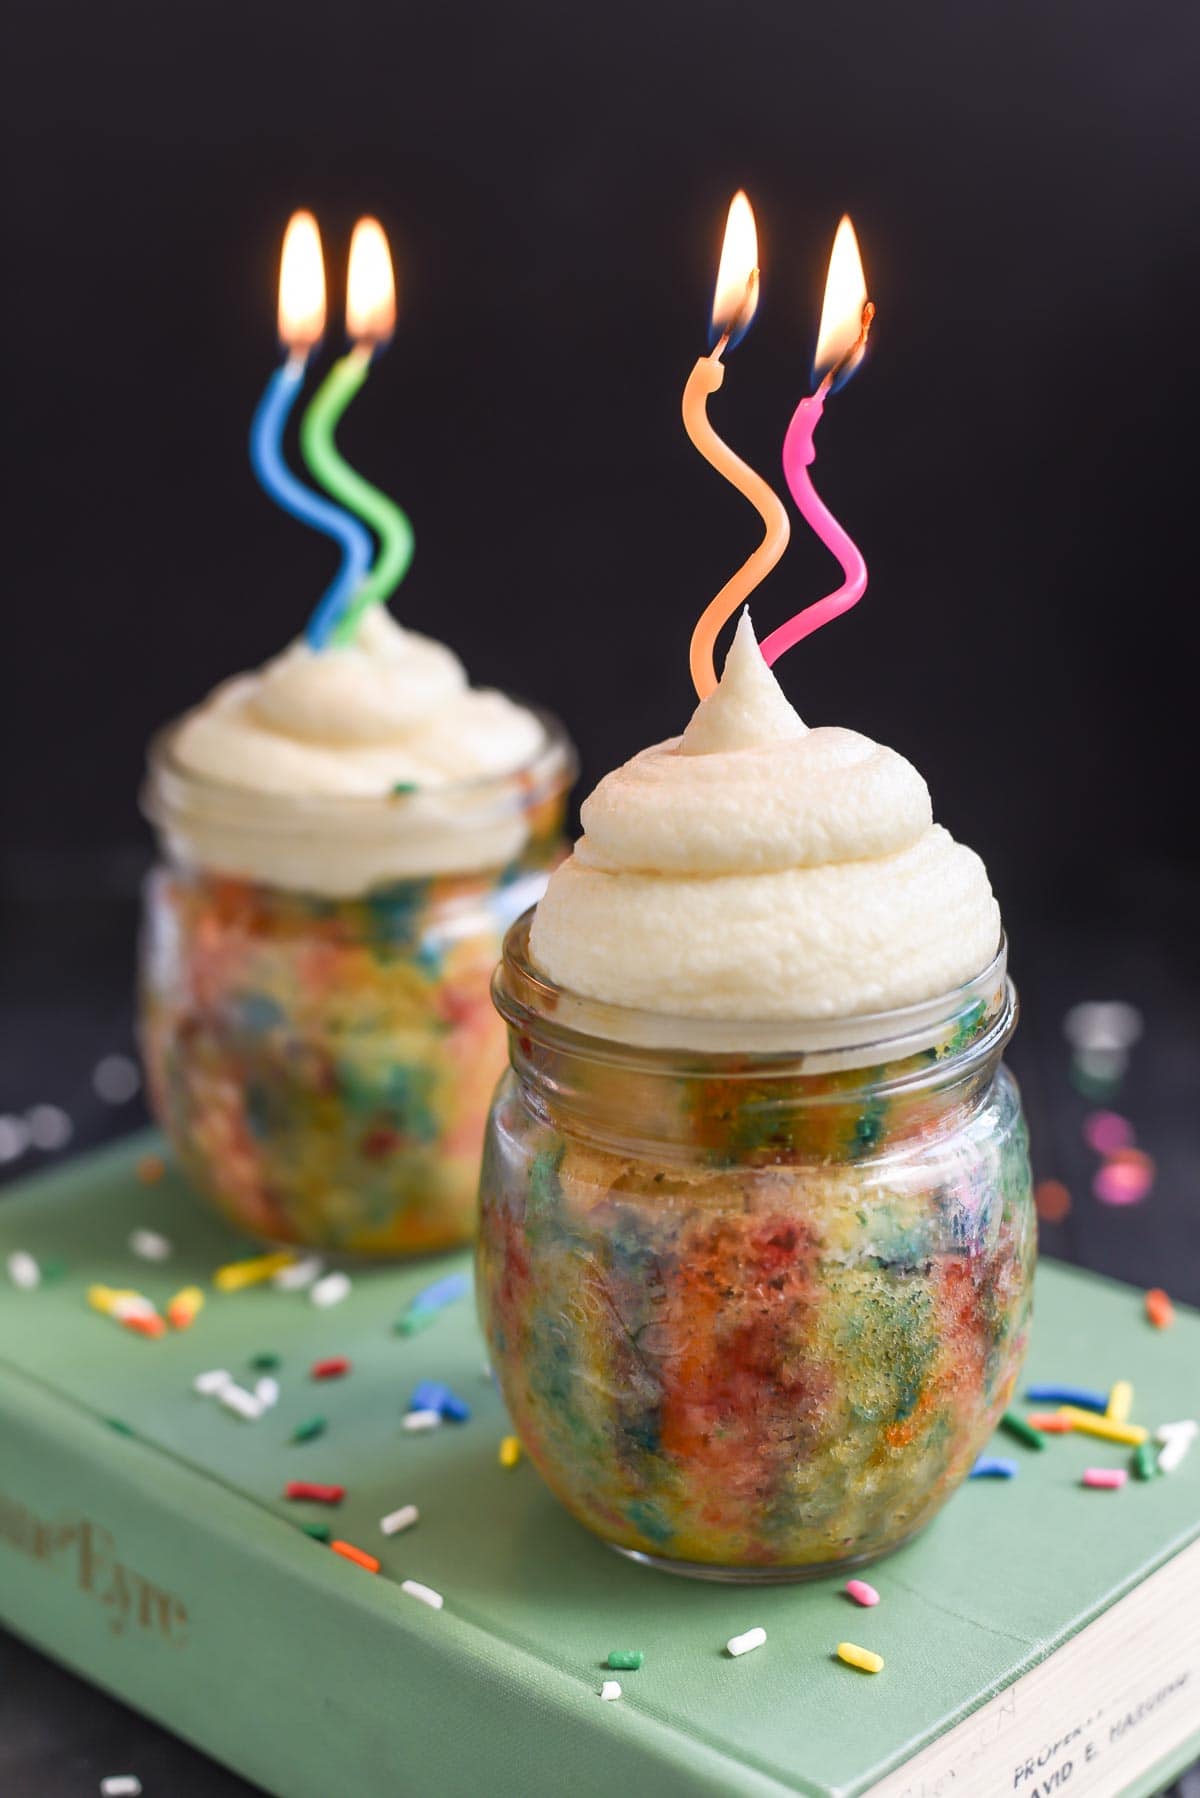 Nothing could be more fun than this Funfetti Cake in a Jar. The easy recipe makes two perfect servings!